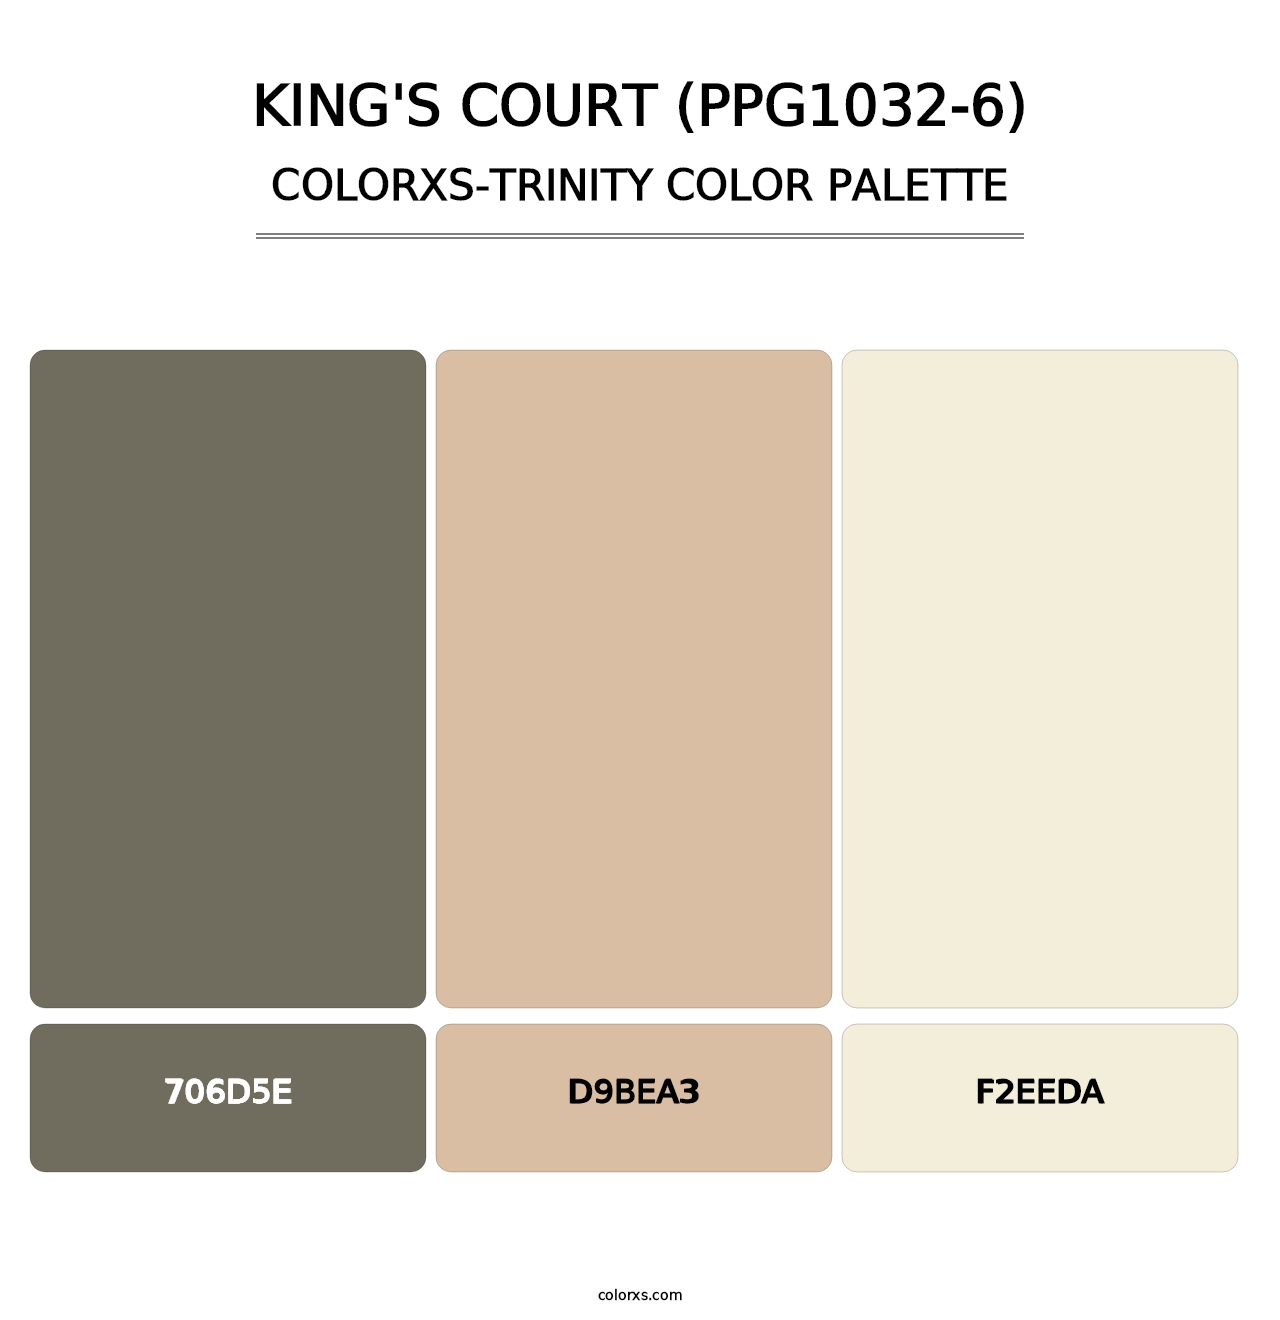 King's Court (PPG1032-6) - Colorxs Trinity Palette